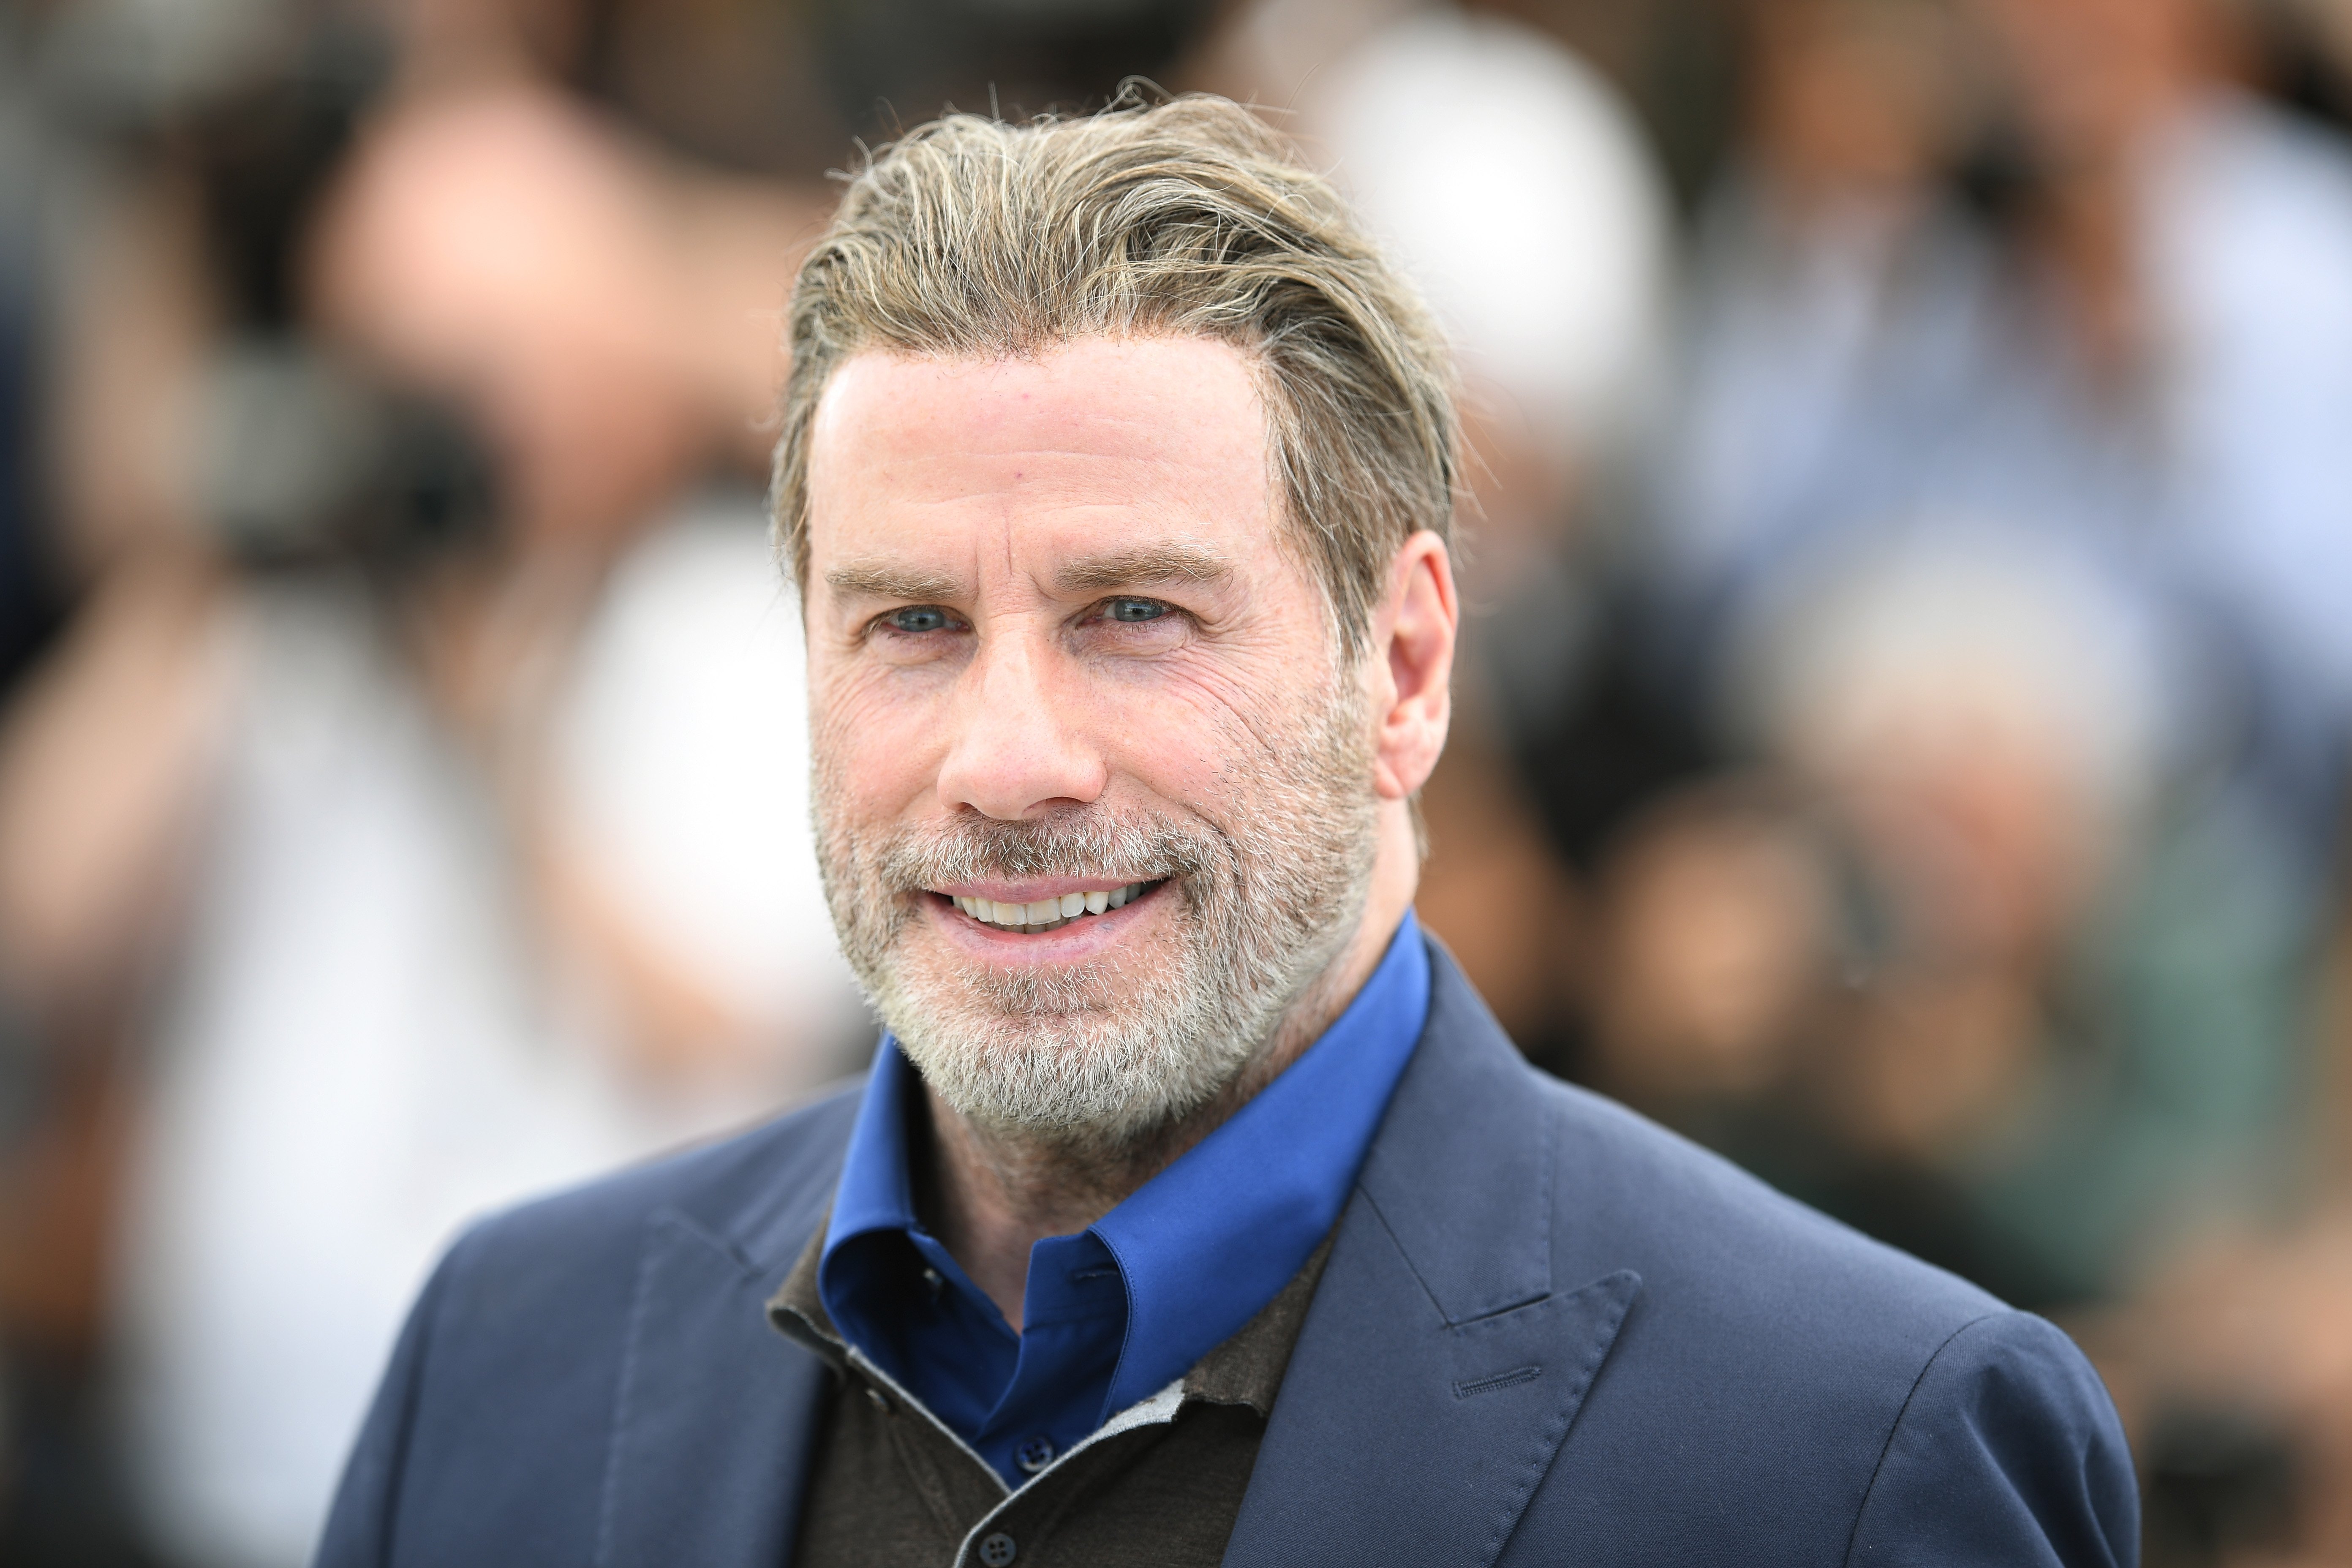 John Travolta attends the photocall for "Rendezvous with John Travolta - Gotti" at Cannes Film Festival in Cannes, France on May 15, 2018 | Photo: Getty Images